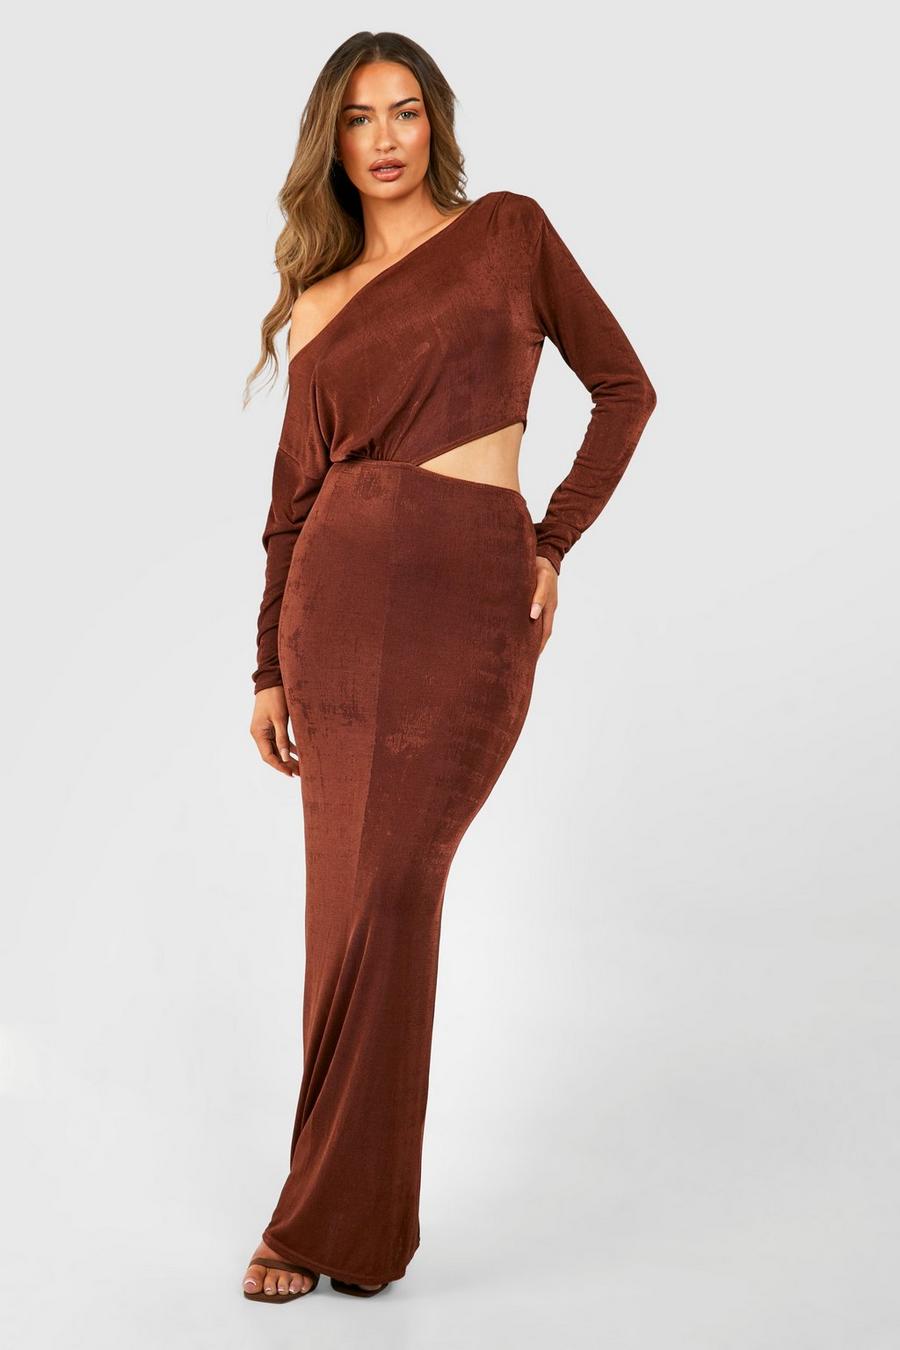 Chocolate Boat Neck Ruched Acetate Slinky Cut Out Maxi Dress